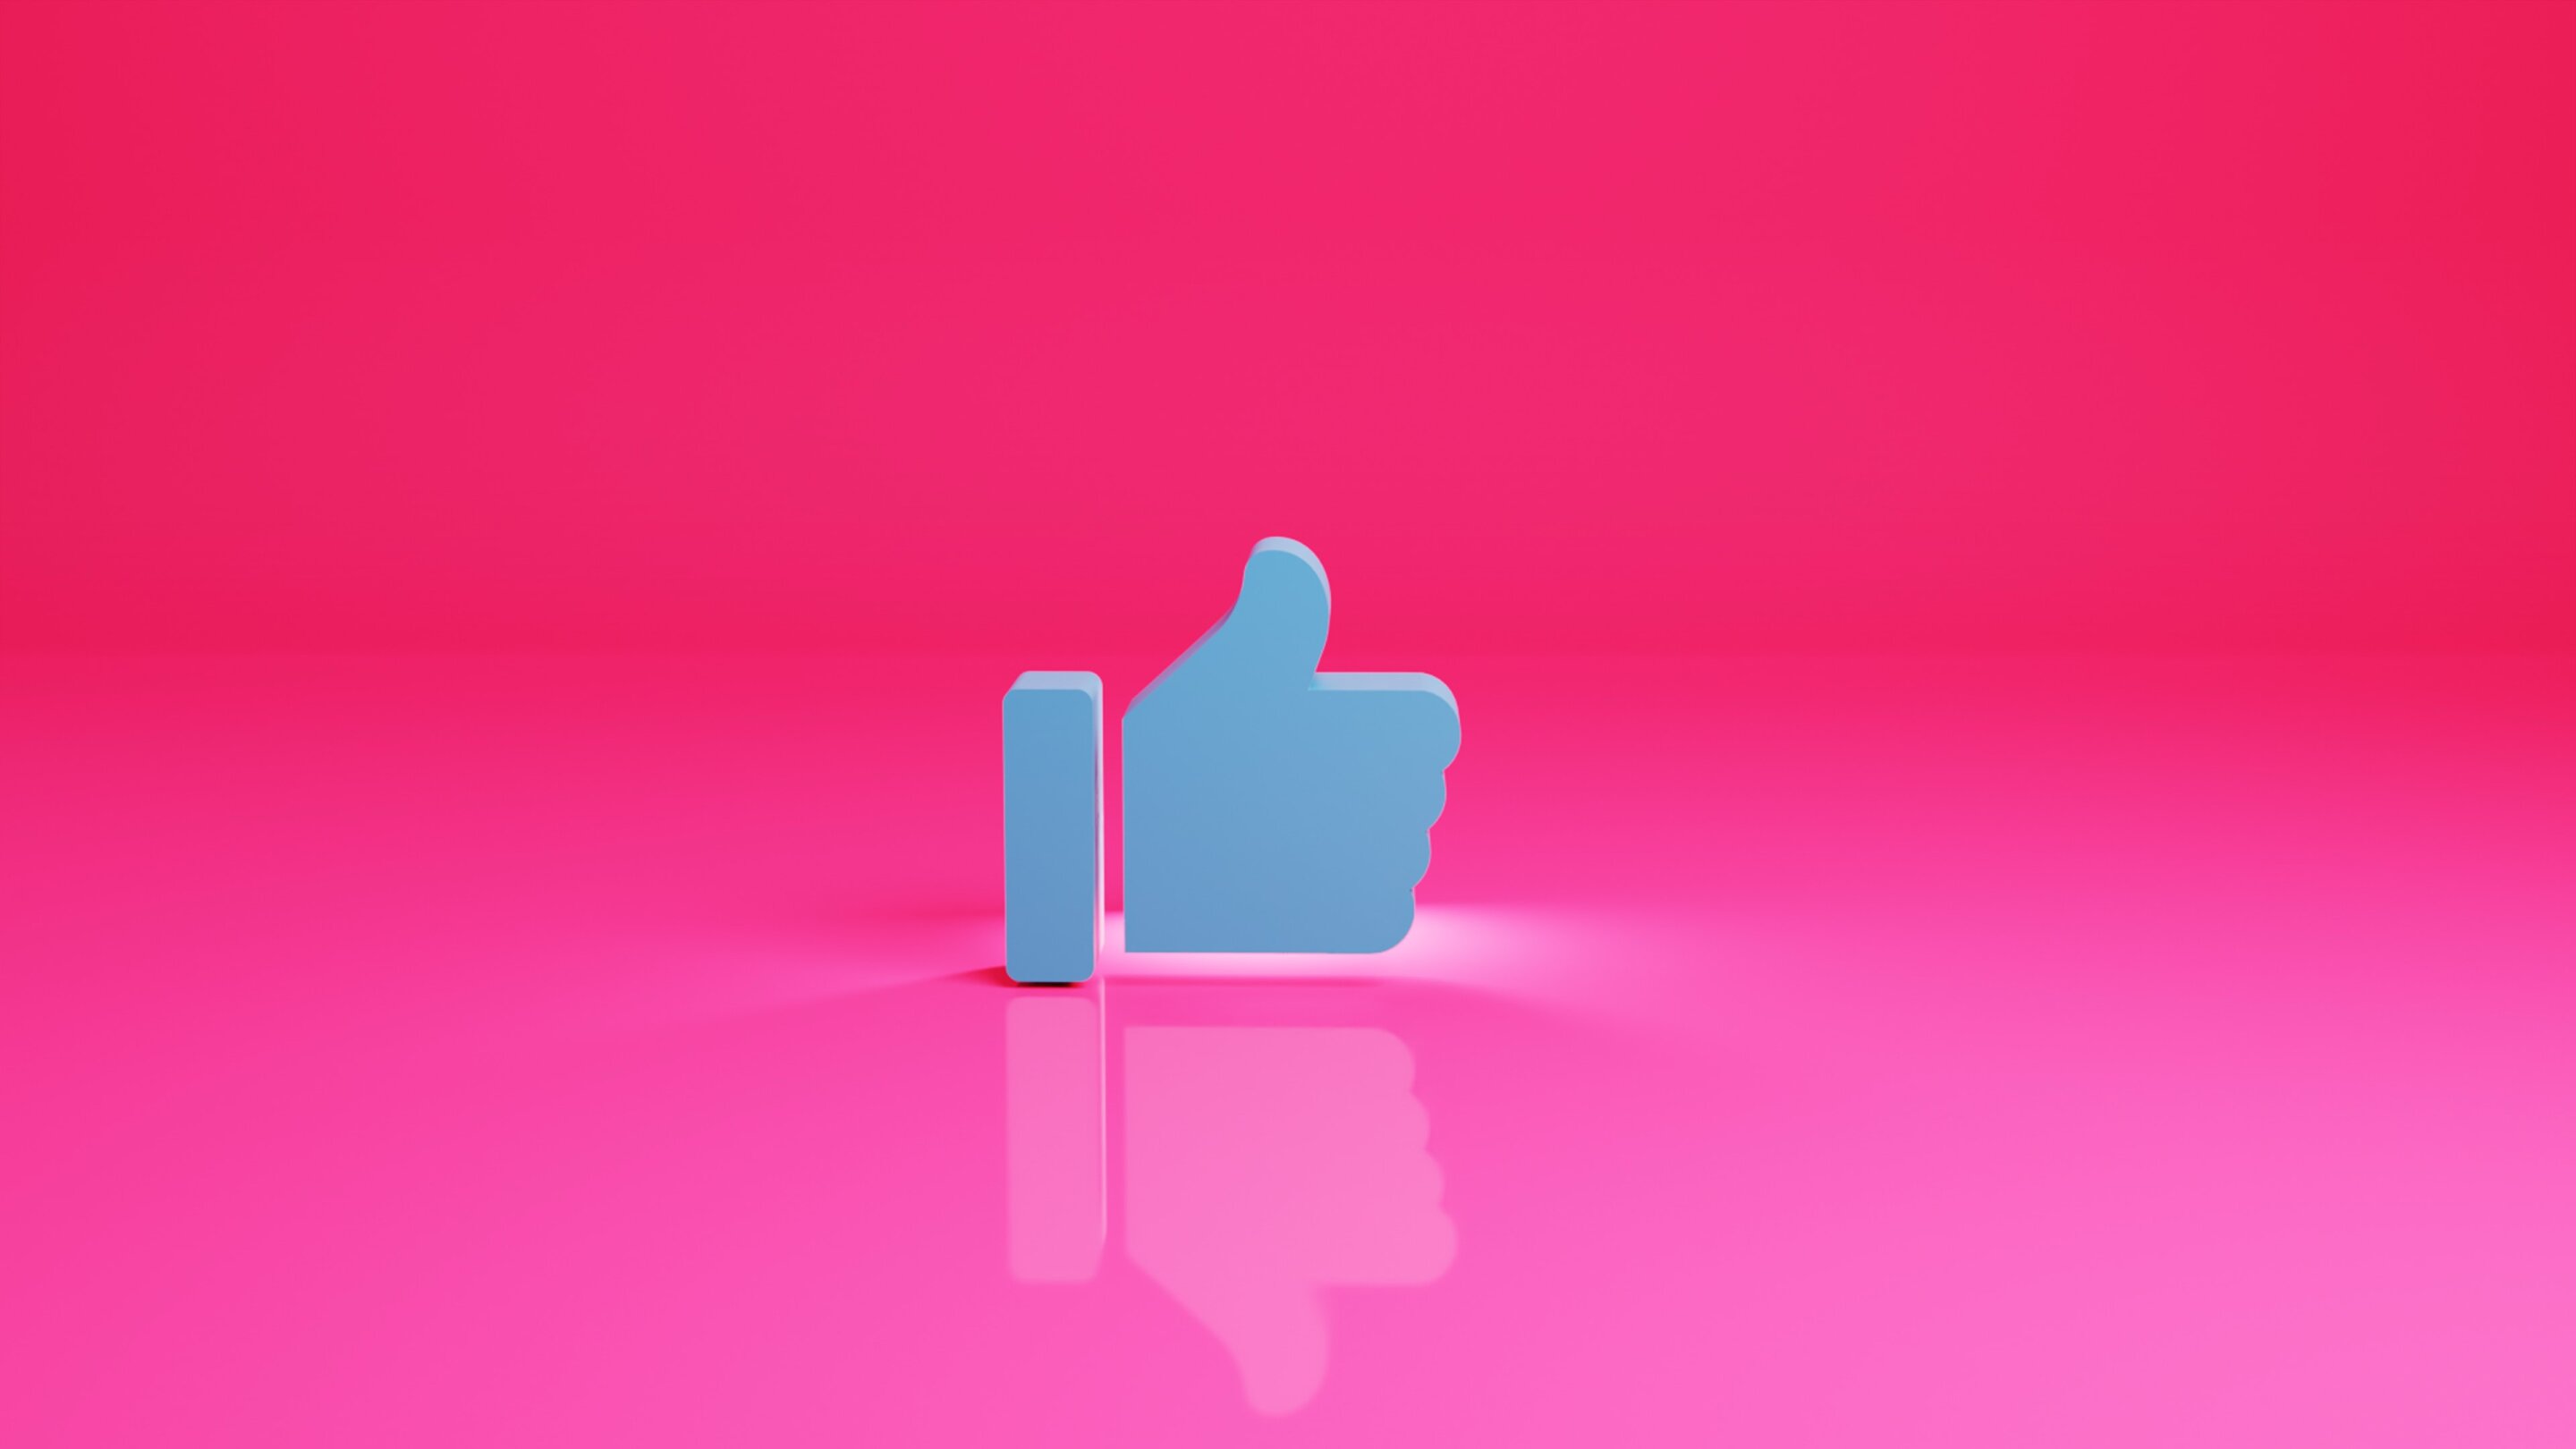 How Facebook clickbait draws users into engaging with posts